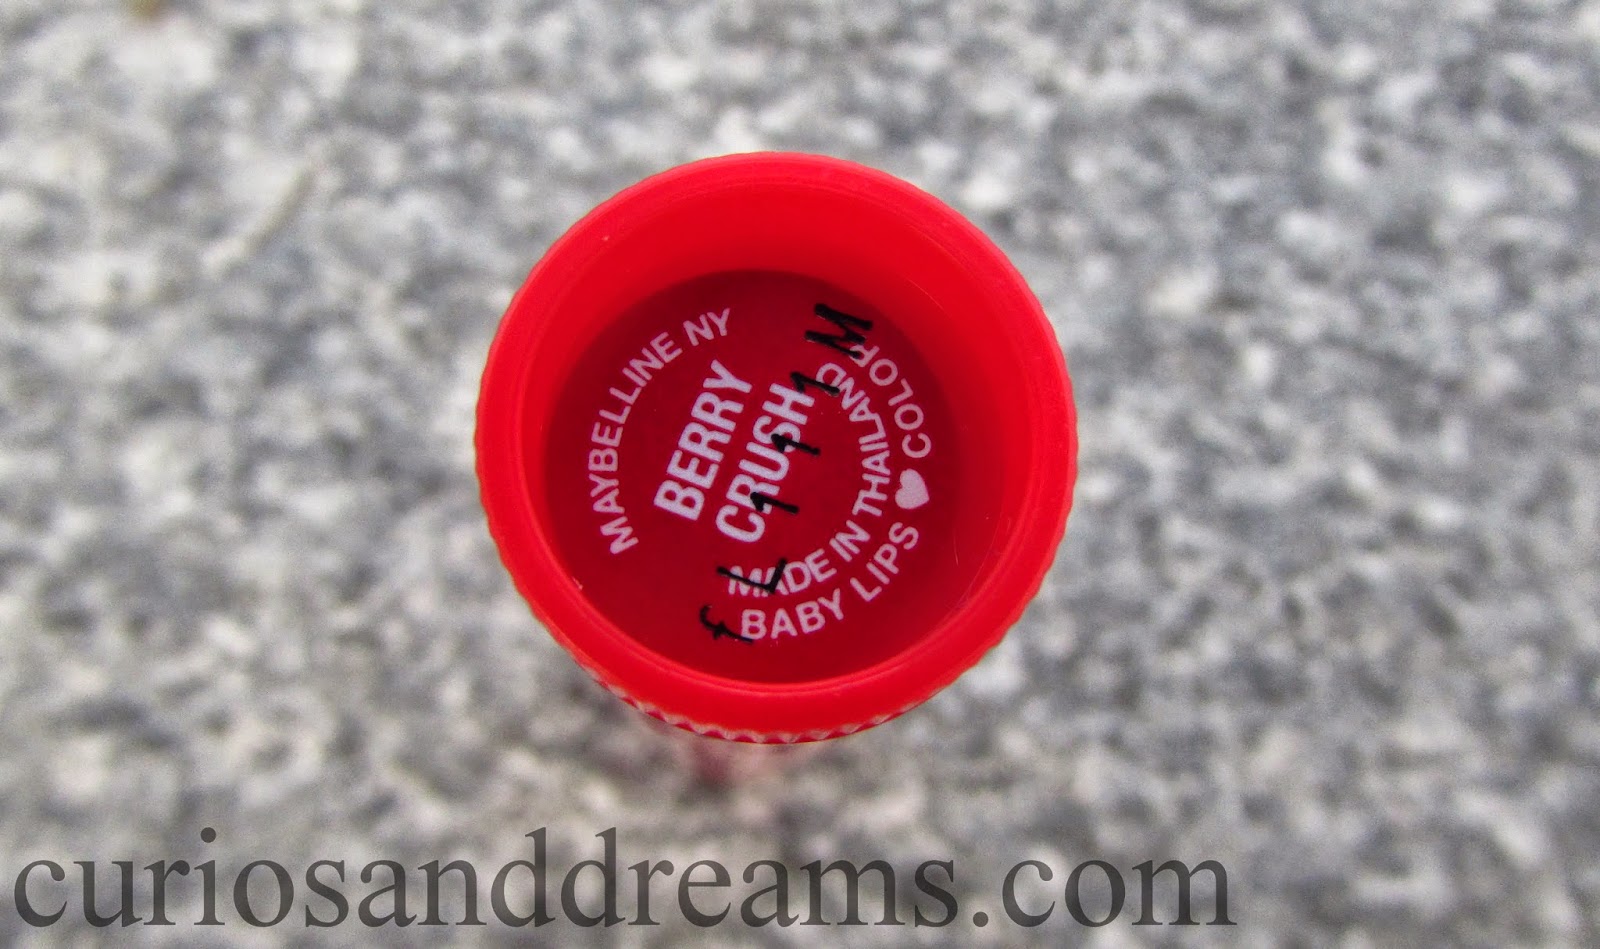 Maybelline Baby Lips Berry Crush Review, Maybelline Baby Lips Berry Crush Swatch